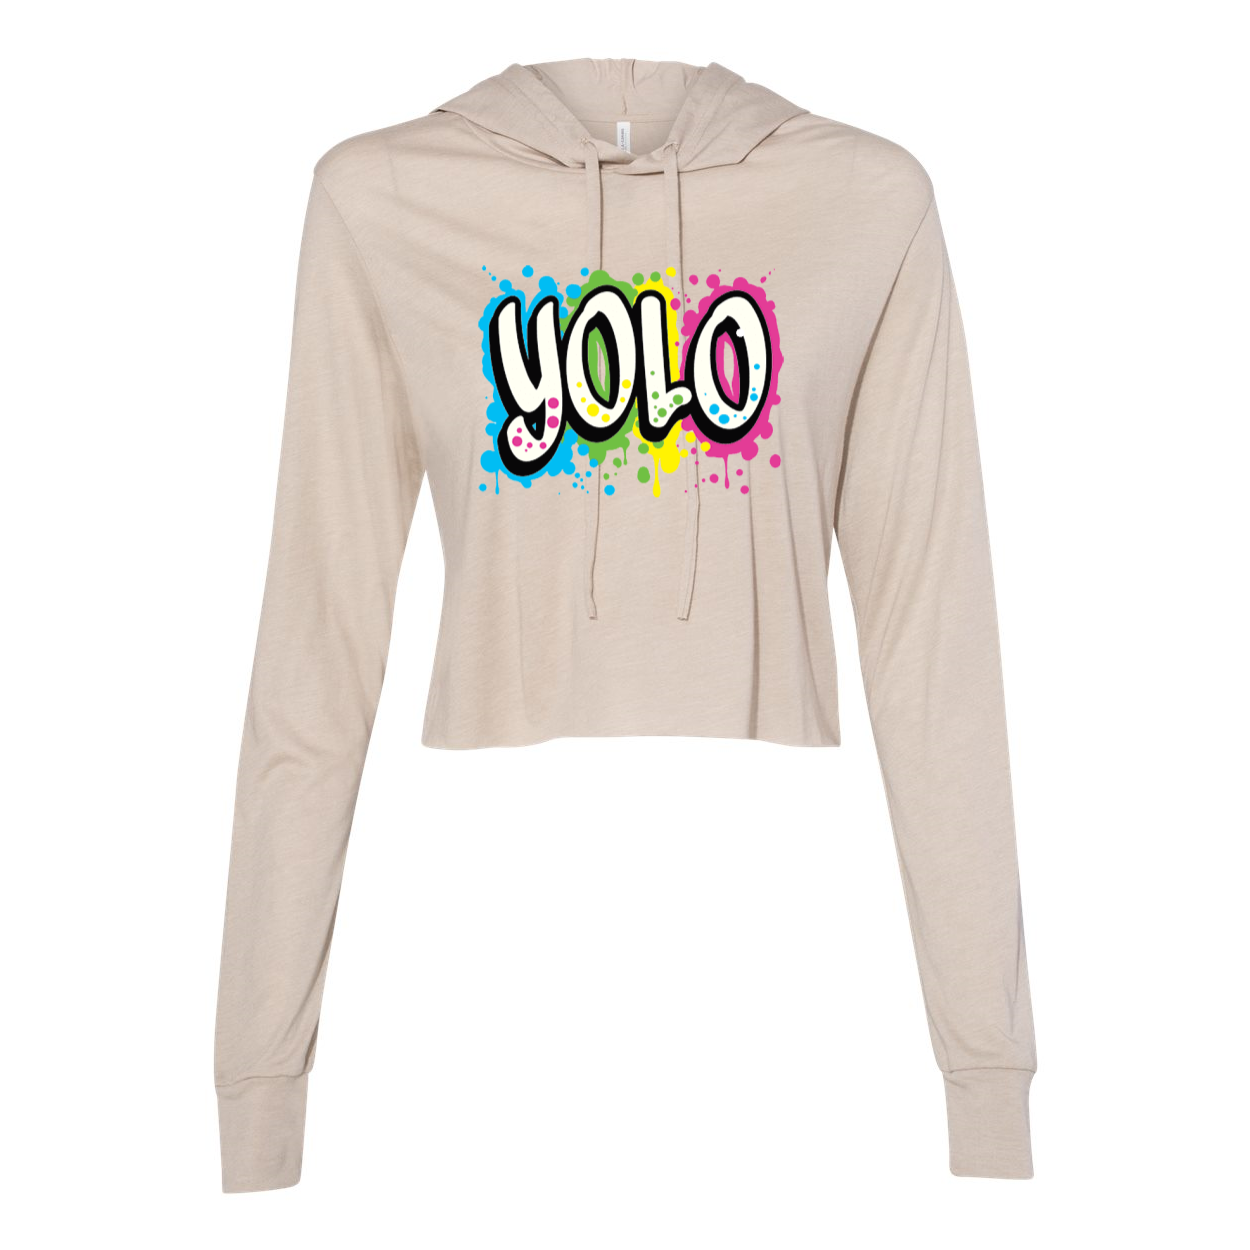 YOLO FITTED GRAFFITI CROPPED HOODIE - Yolofitted